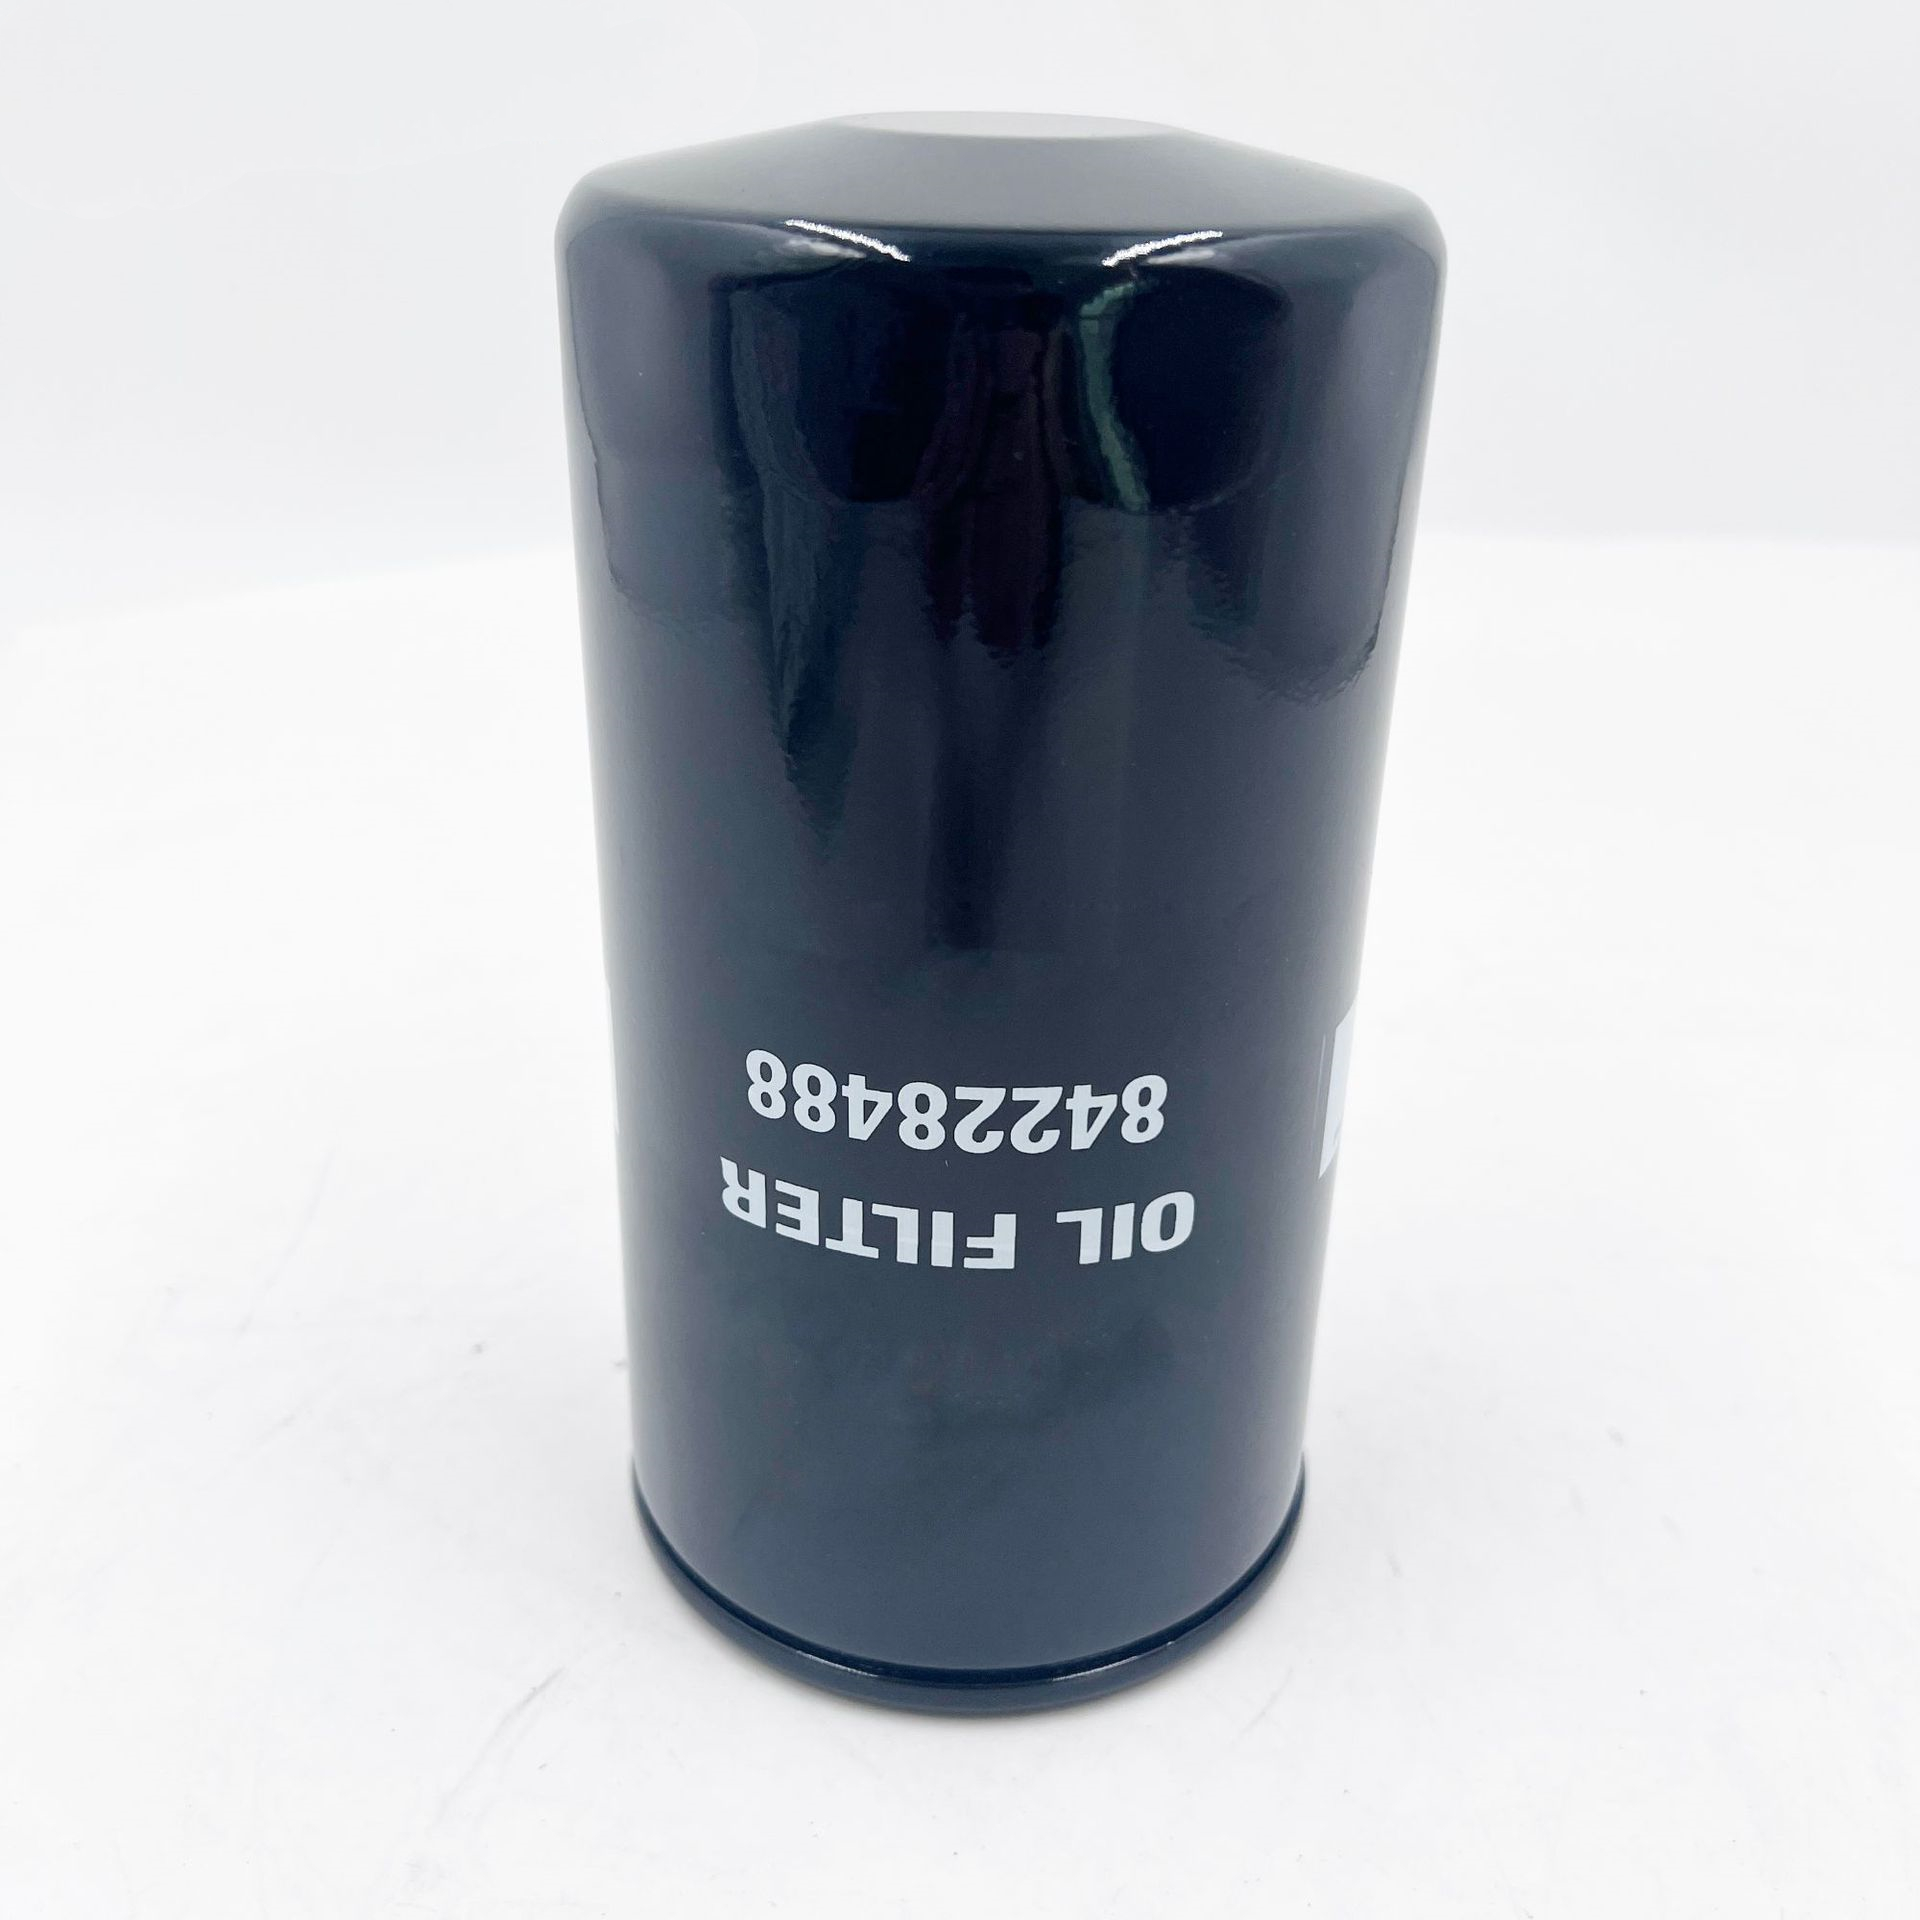 Replace NEW HOLLAND Engineering Machinery Oil Filter Element 84228488